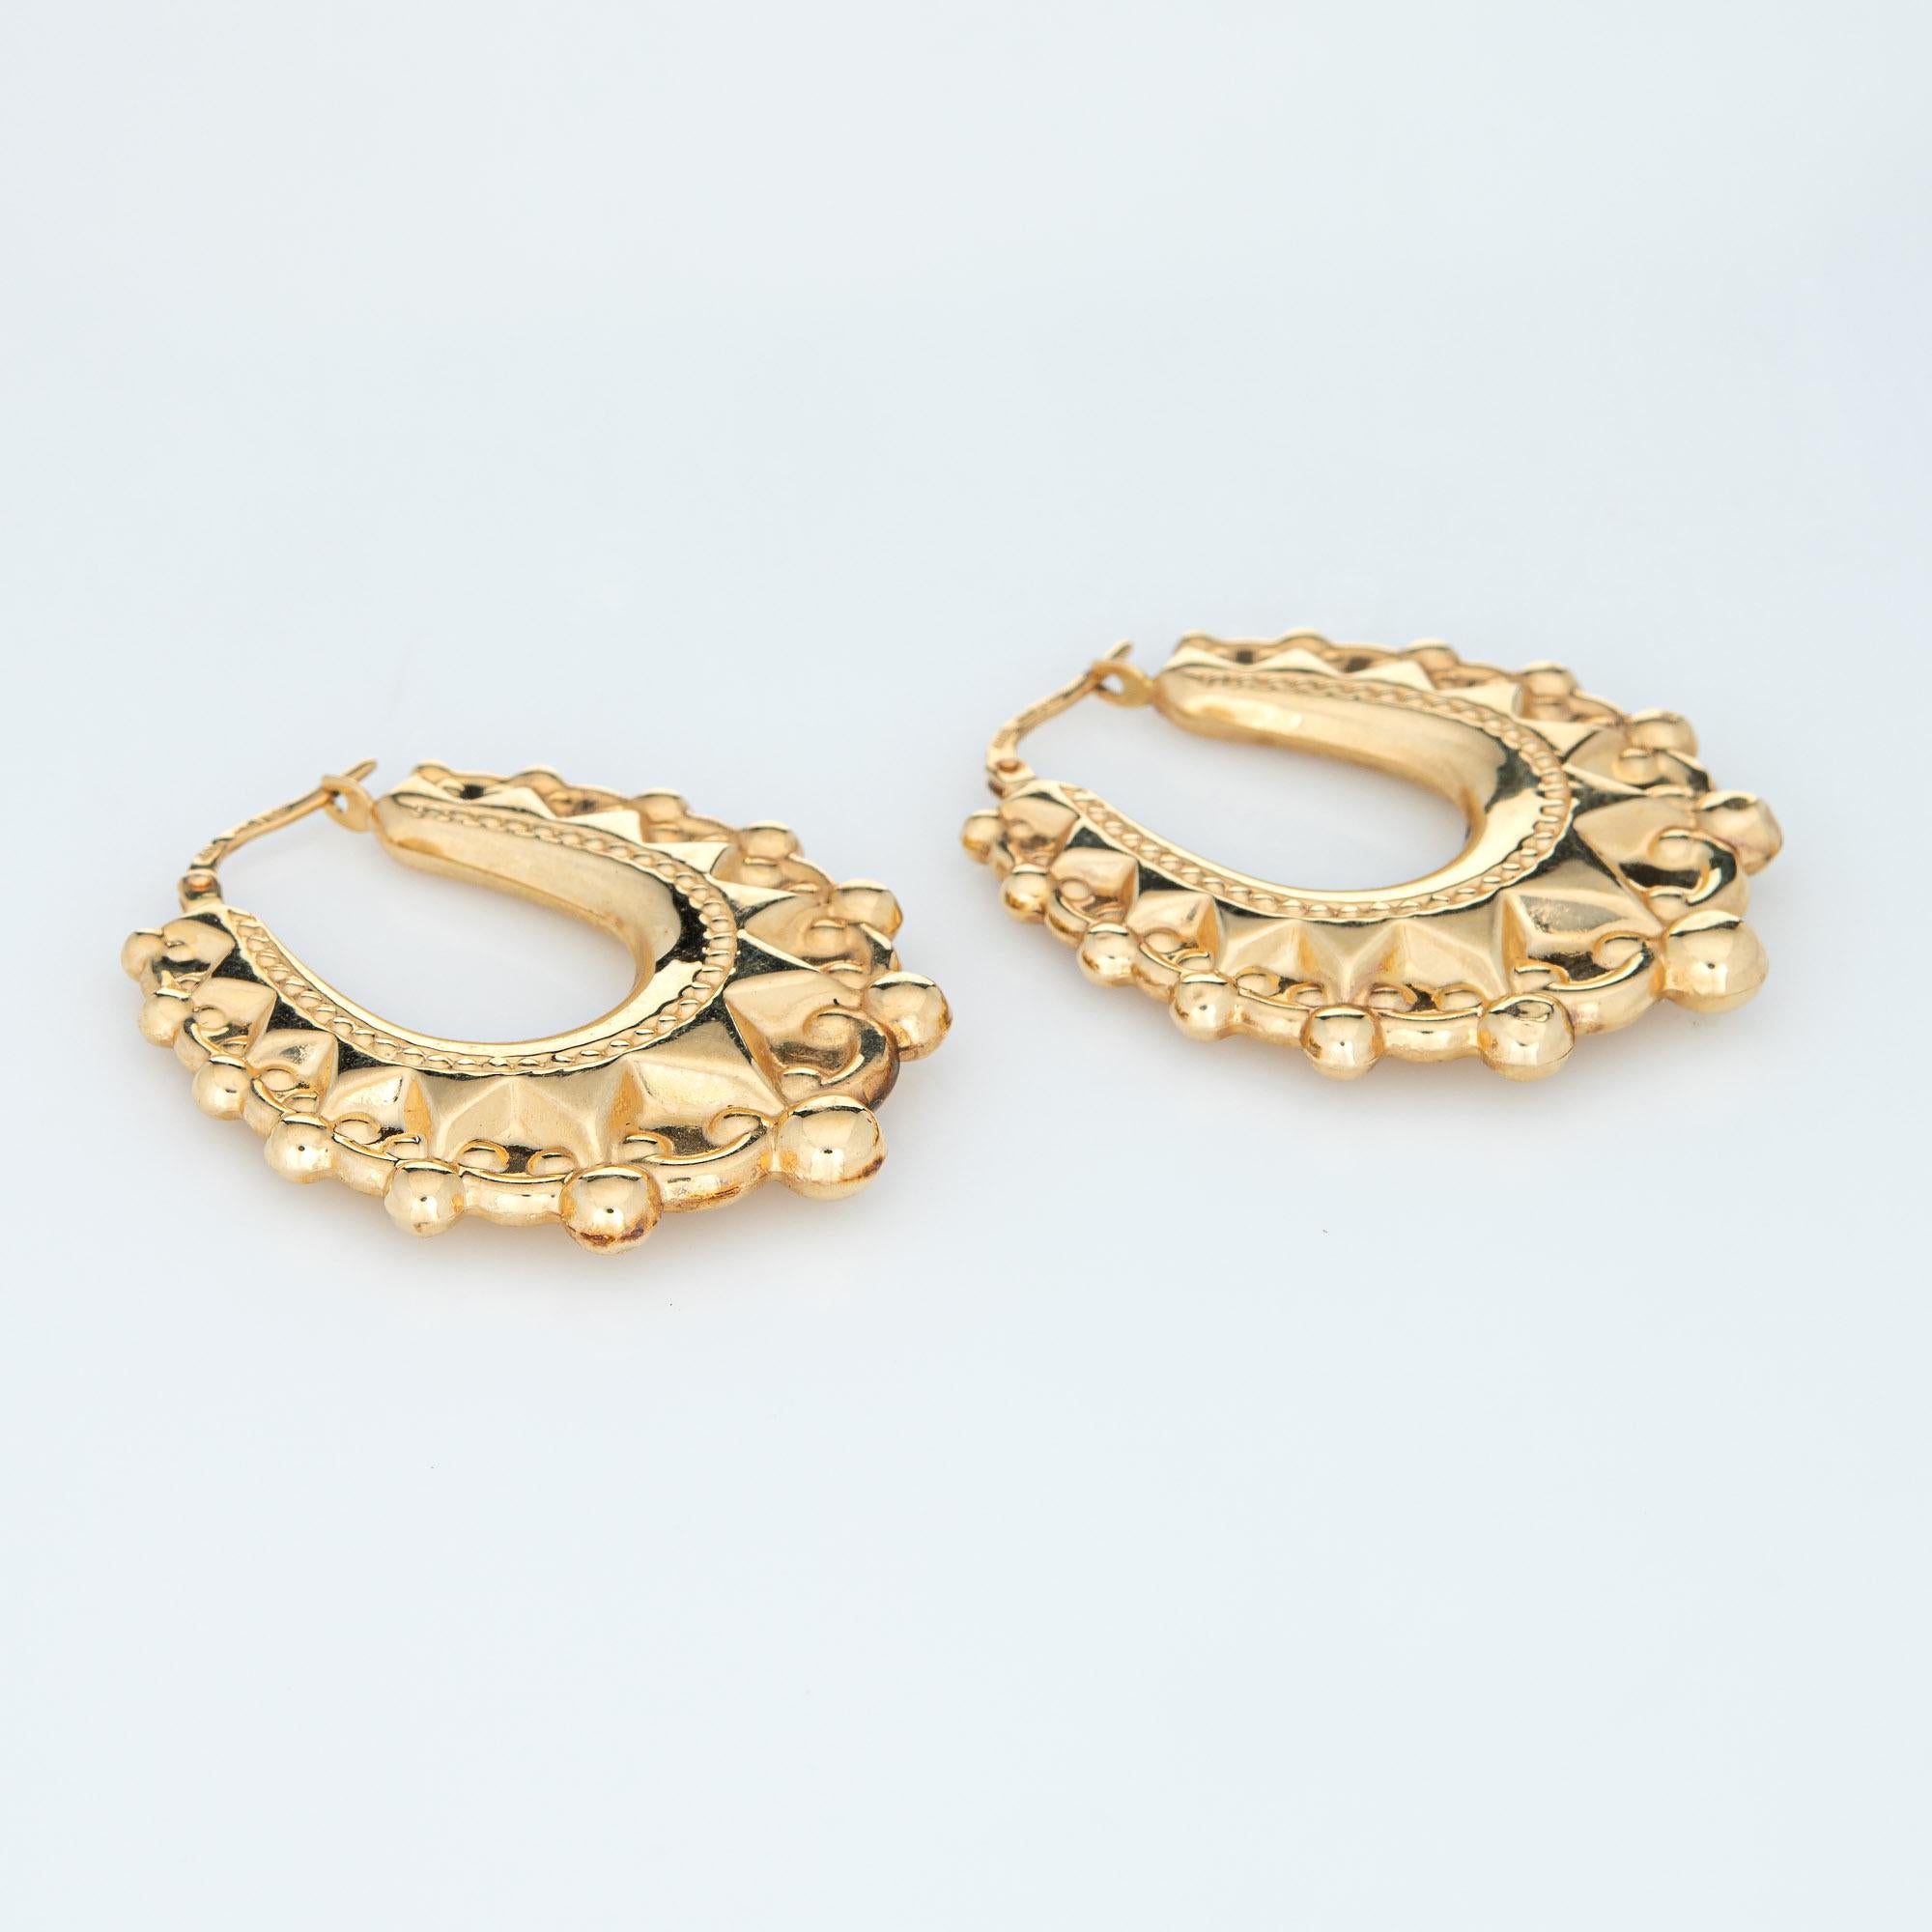 Fine detailed pair of oval hoop earrings crafted in 14k yellow gold. 

The stylish earrings feature an elaborate scrolled design with bead detailing. The hollow earrings offer a lightweight feel for a comfortable fit on the earlobe. The earrings are